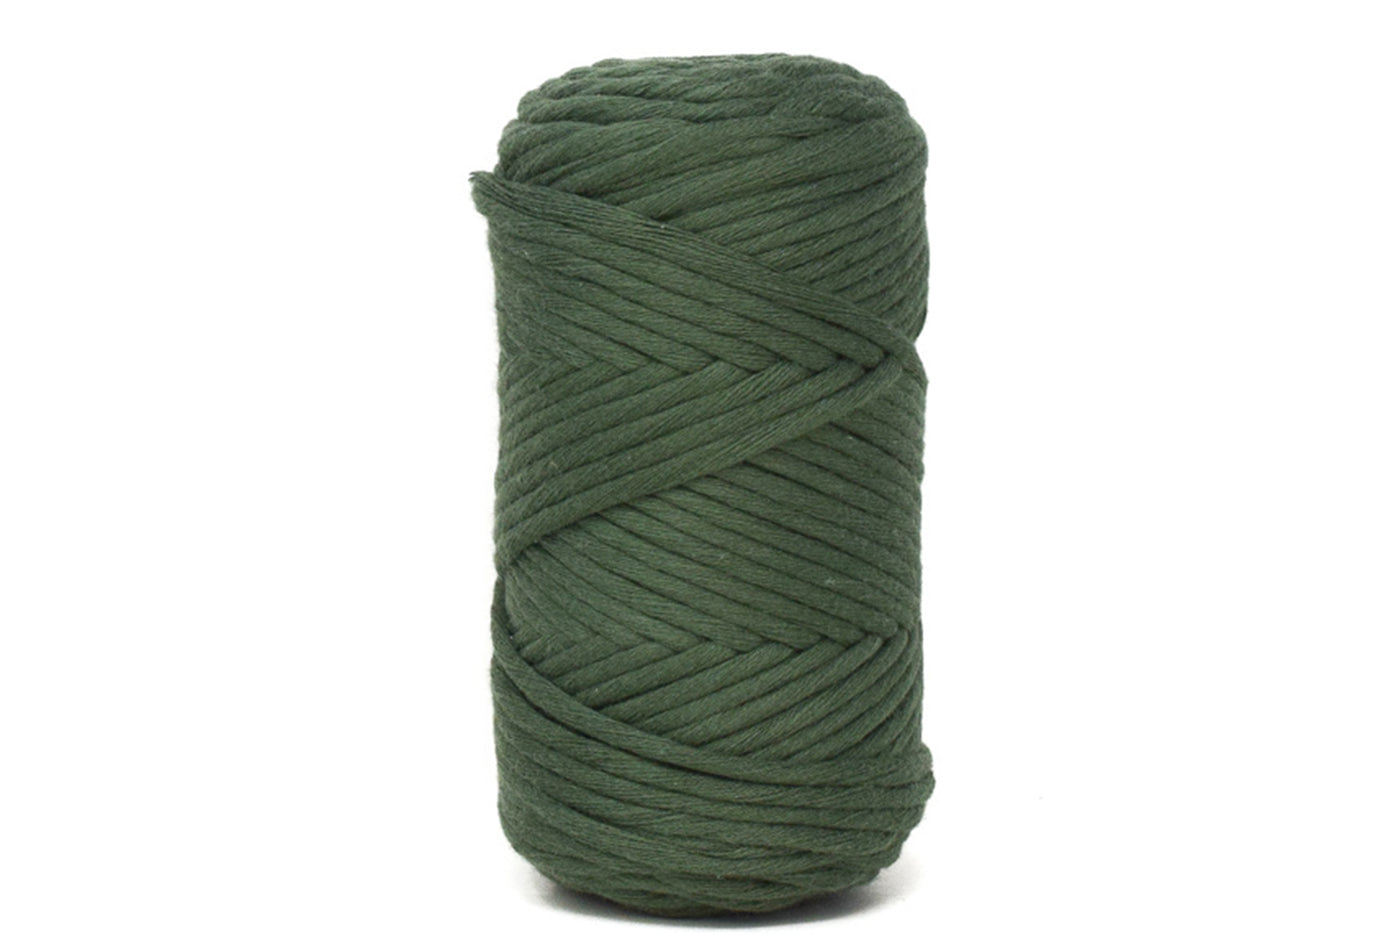 COTTON - VISCOSE ROLL 4 MM - OLIVE GREEN COLOR | LIMITED EDITION